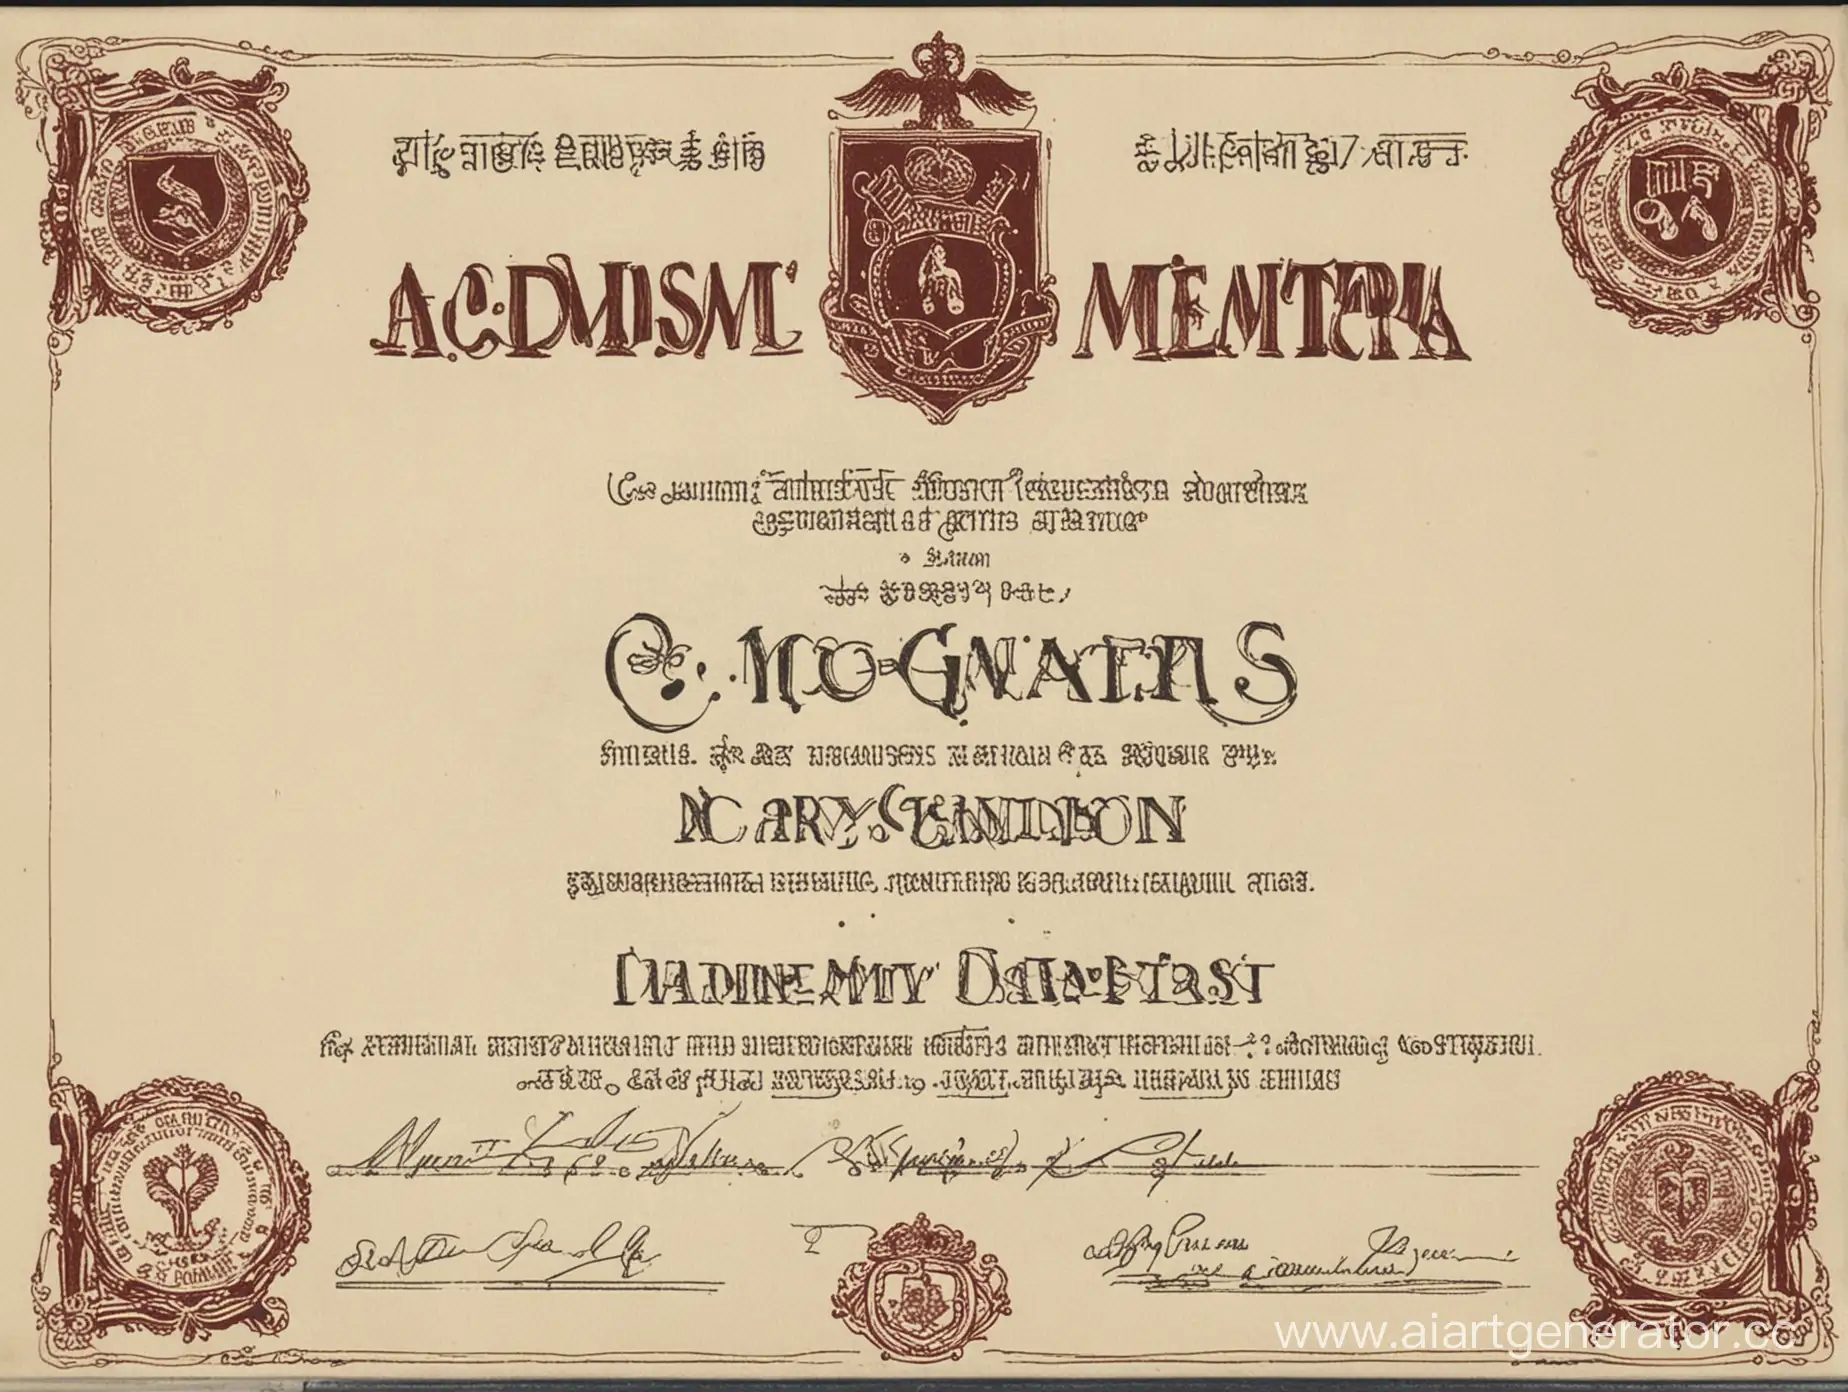 Wizarding-Student-Receiving-Hogwarts-Acceptance-Diploma